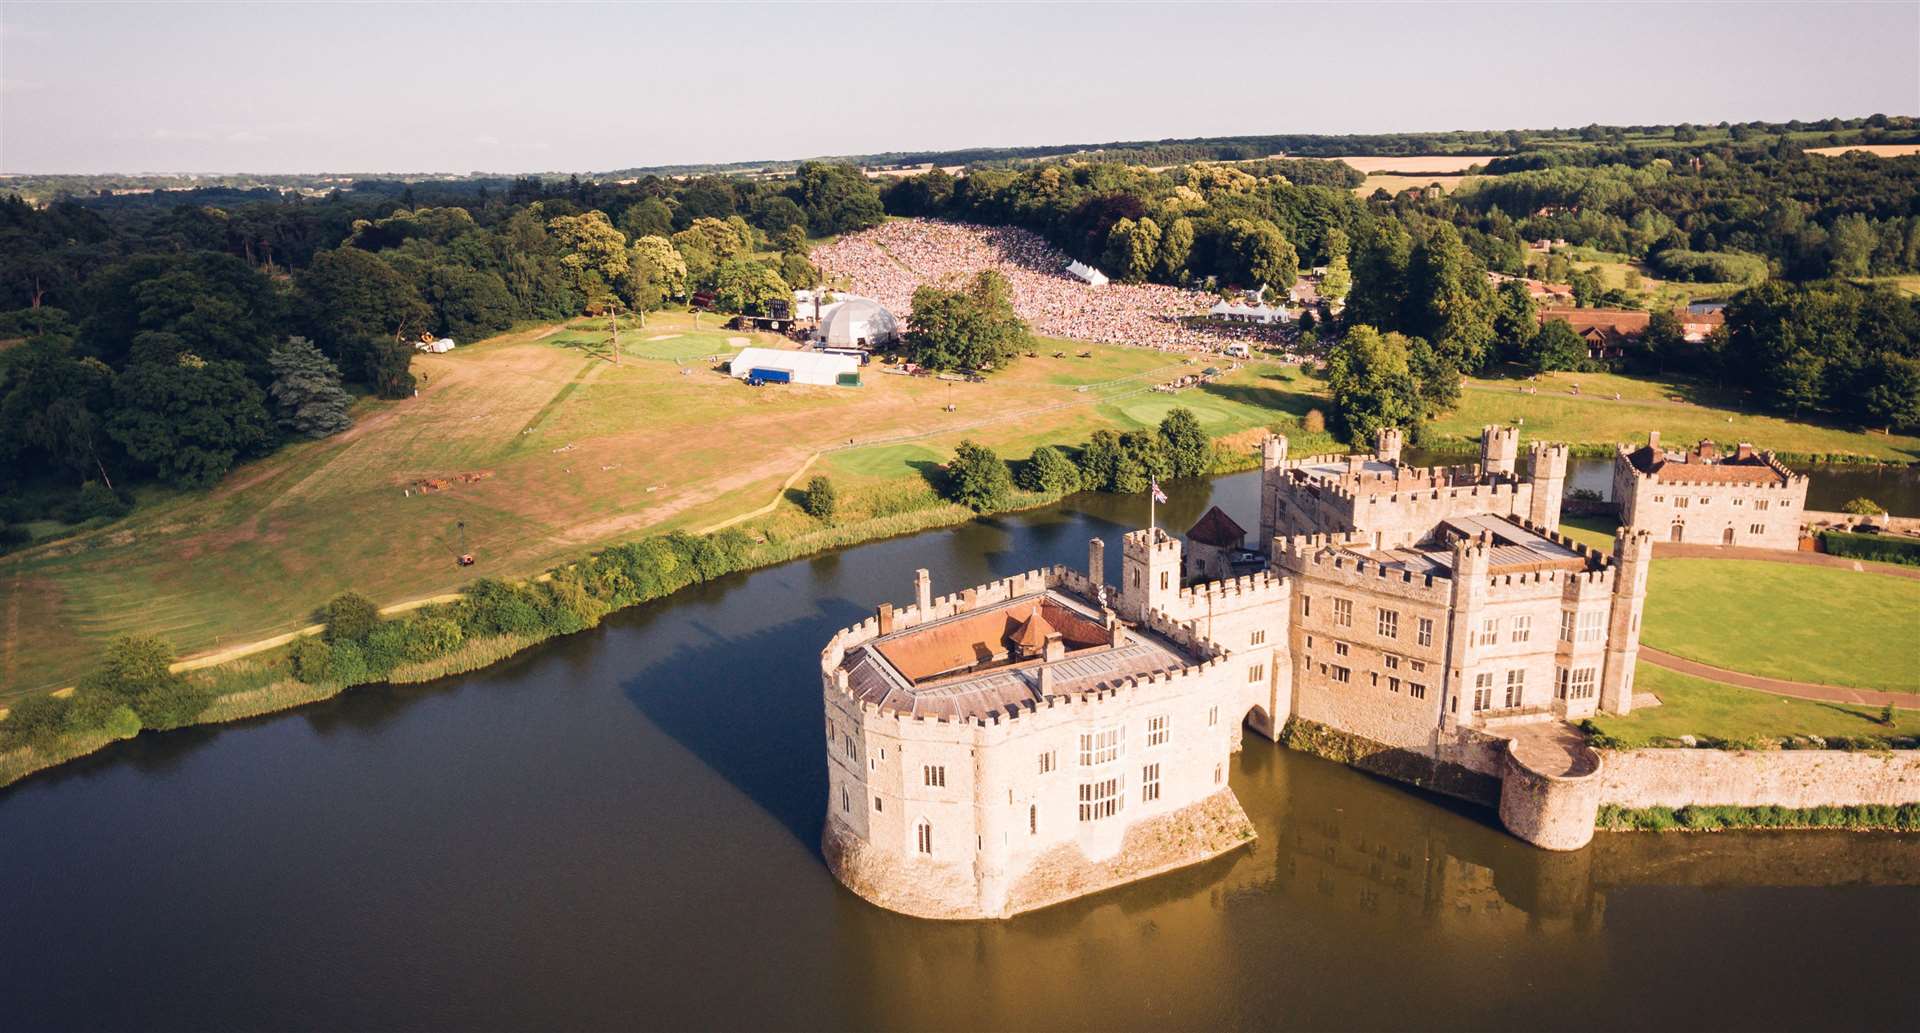 Leeds Castle is celebrating its 900th anniversary